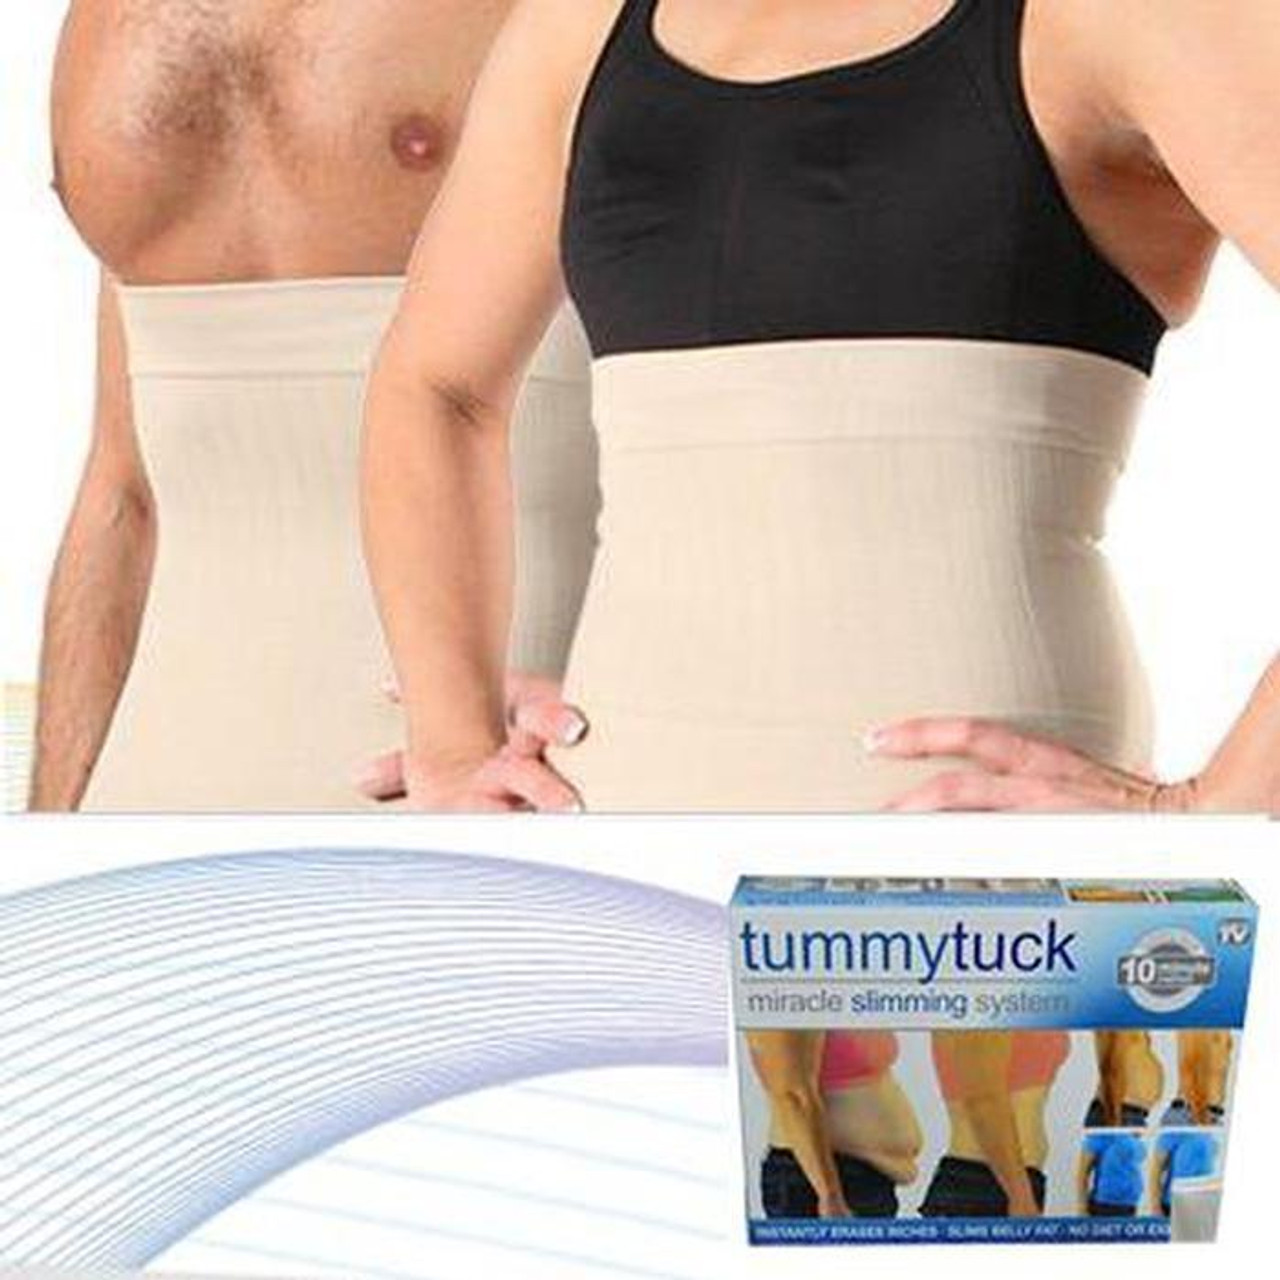 NEW Tummy Tuck Belt Best Miracle Slimming System Weight Loss